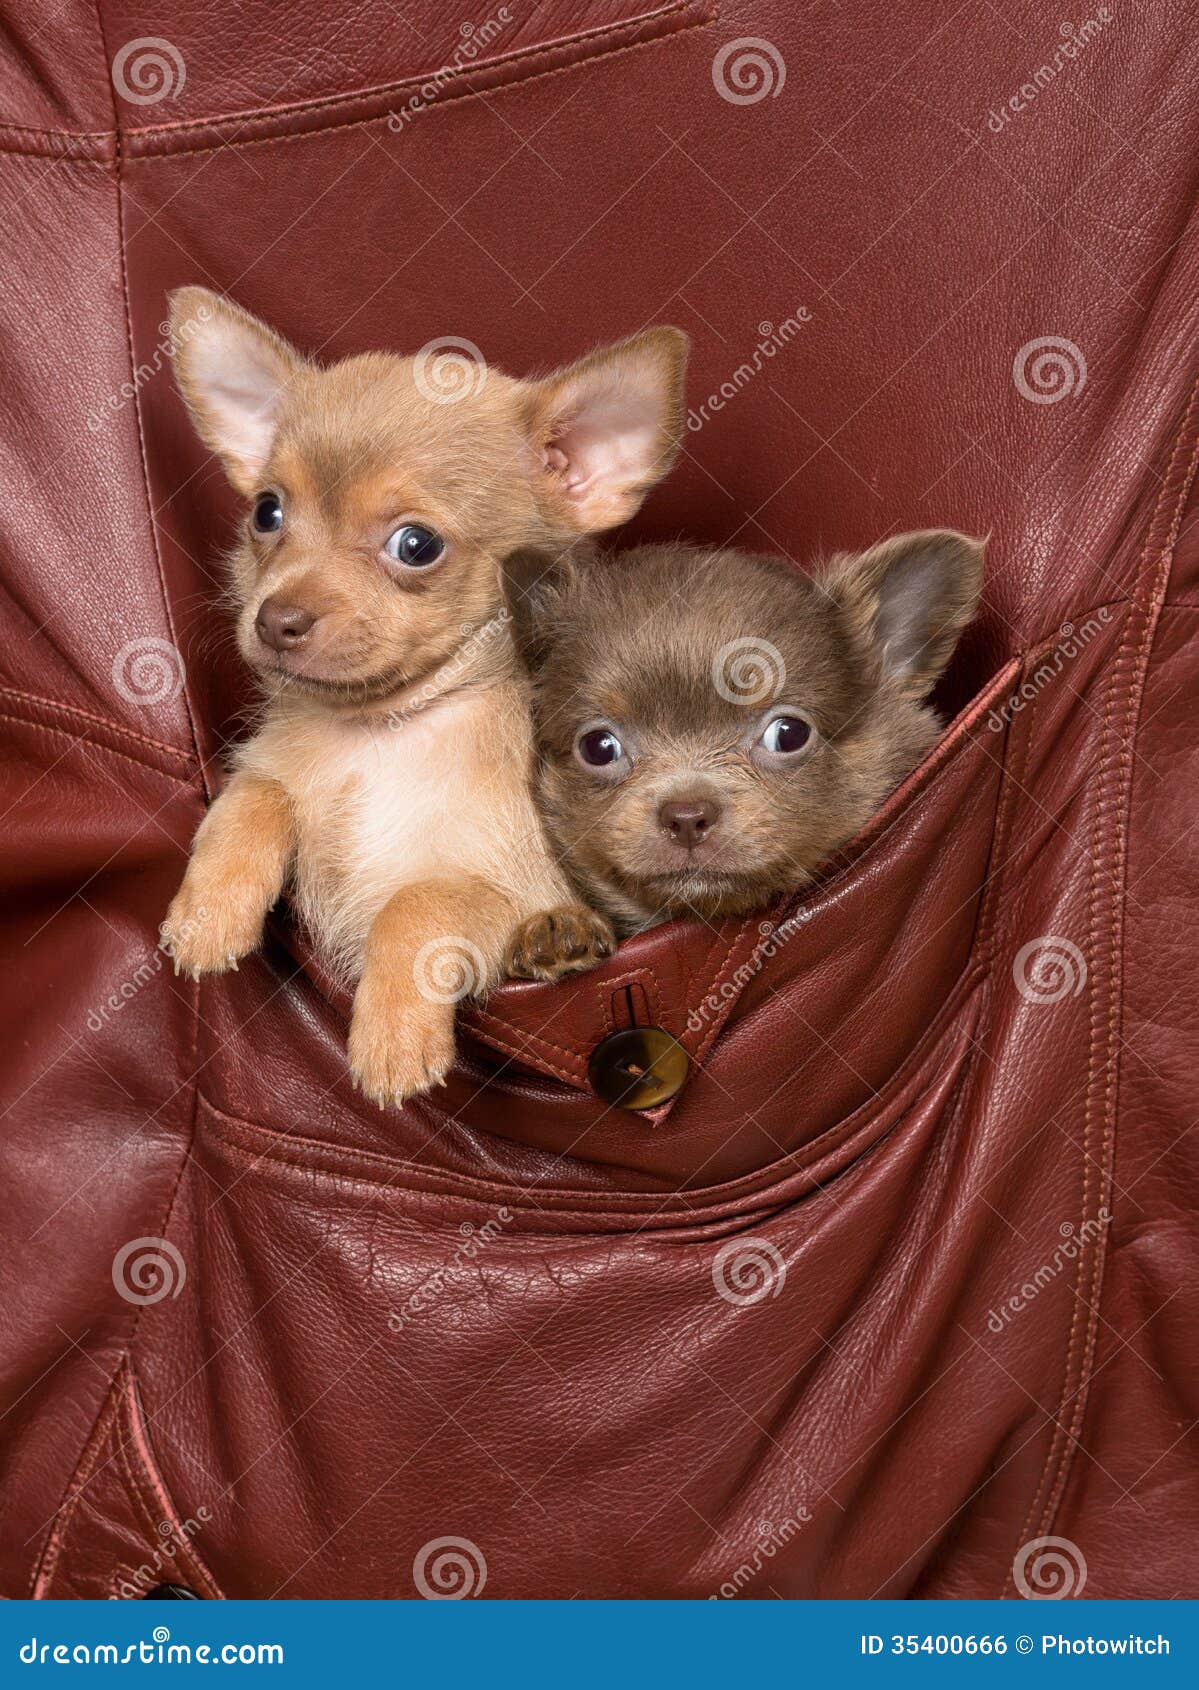 Cute Pocket Dogs dogs in a jacket pocket royalty free stock image ...